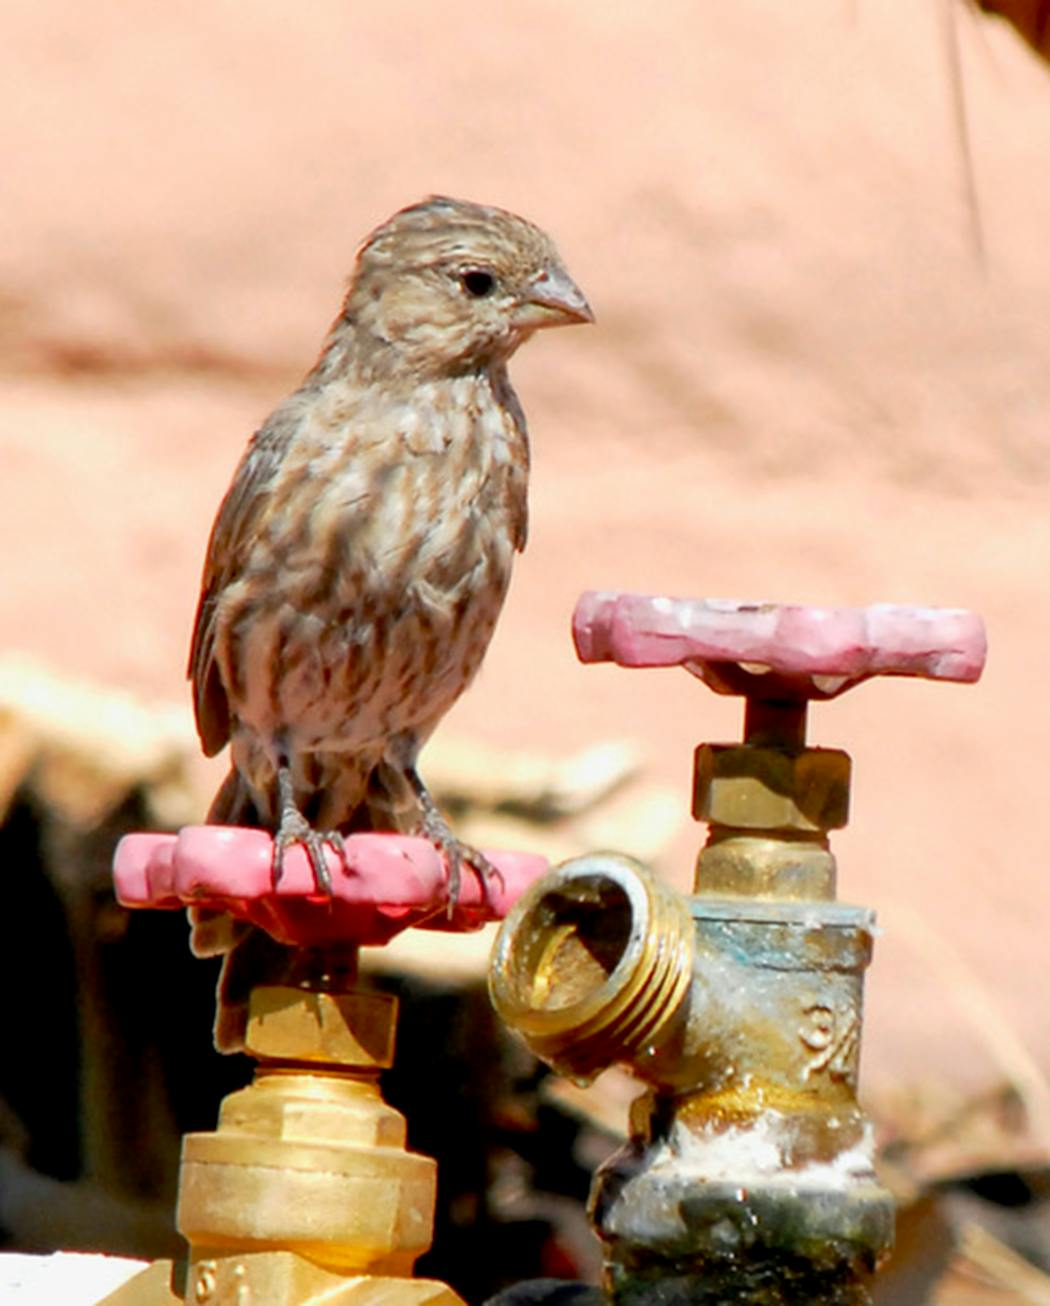 This house finch is waiting for you to give it a drink.